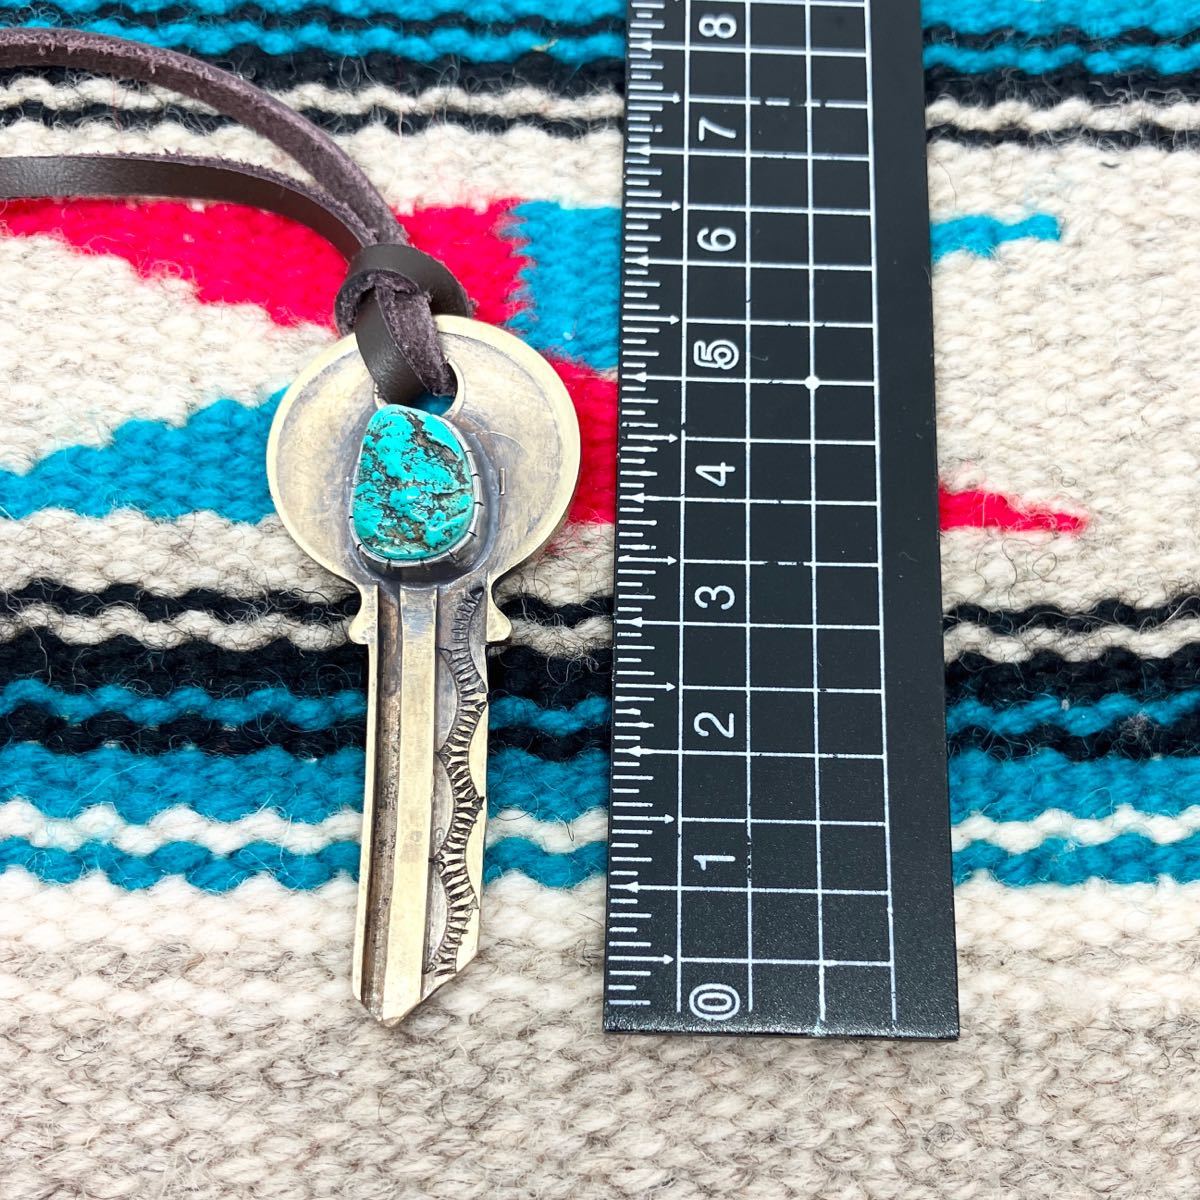  King man turquoise brass made Vintage key key necklace # Indian jewelry Native American n brass silver 